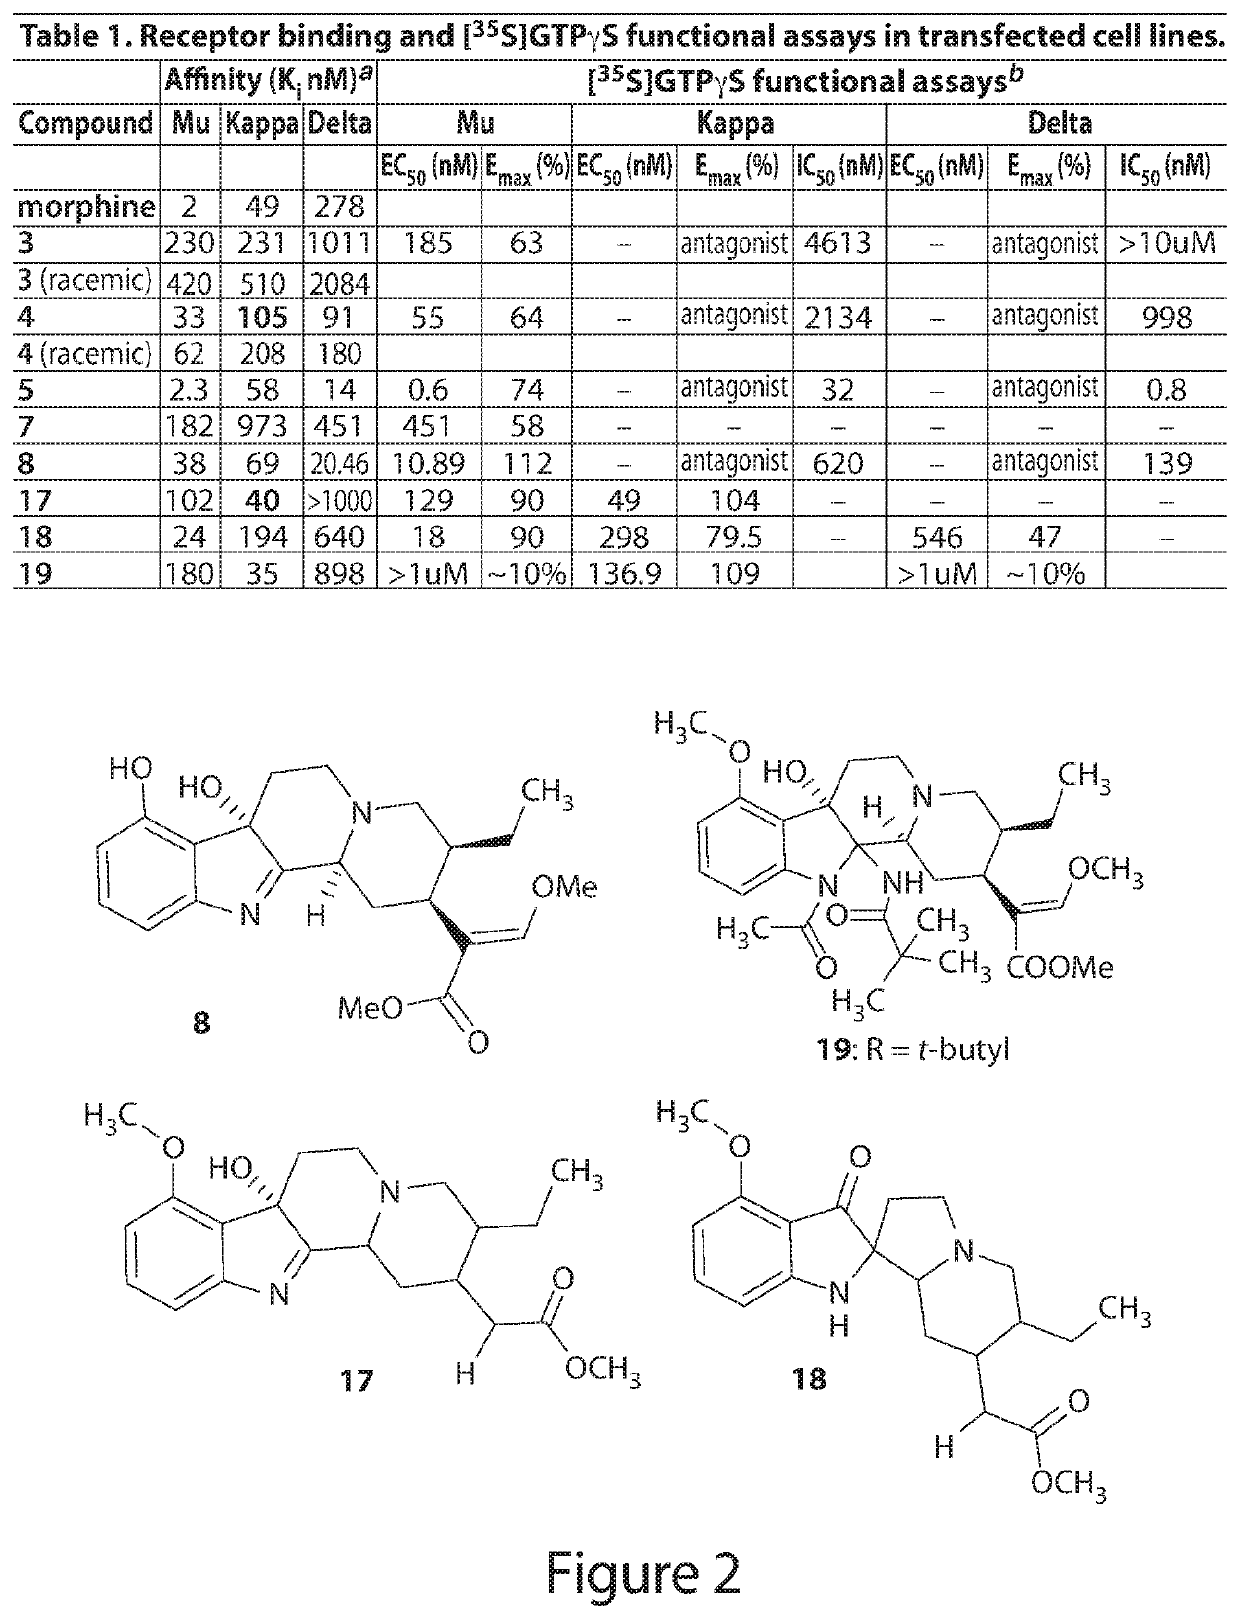 Mitragynine analogs and uses thereof